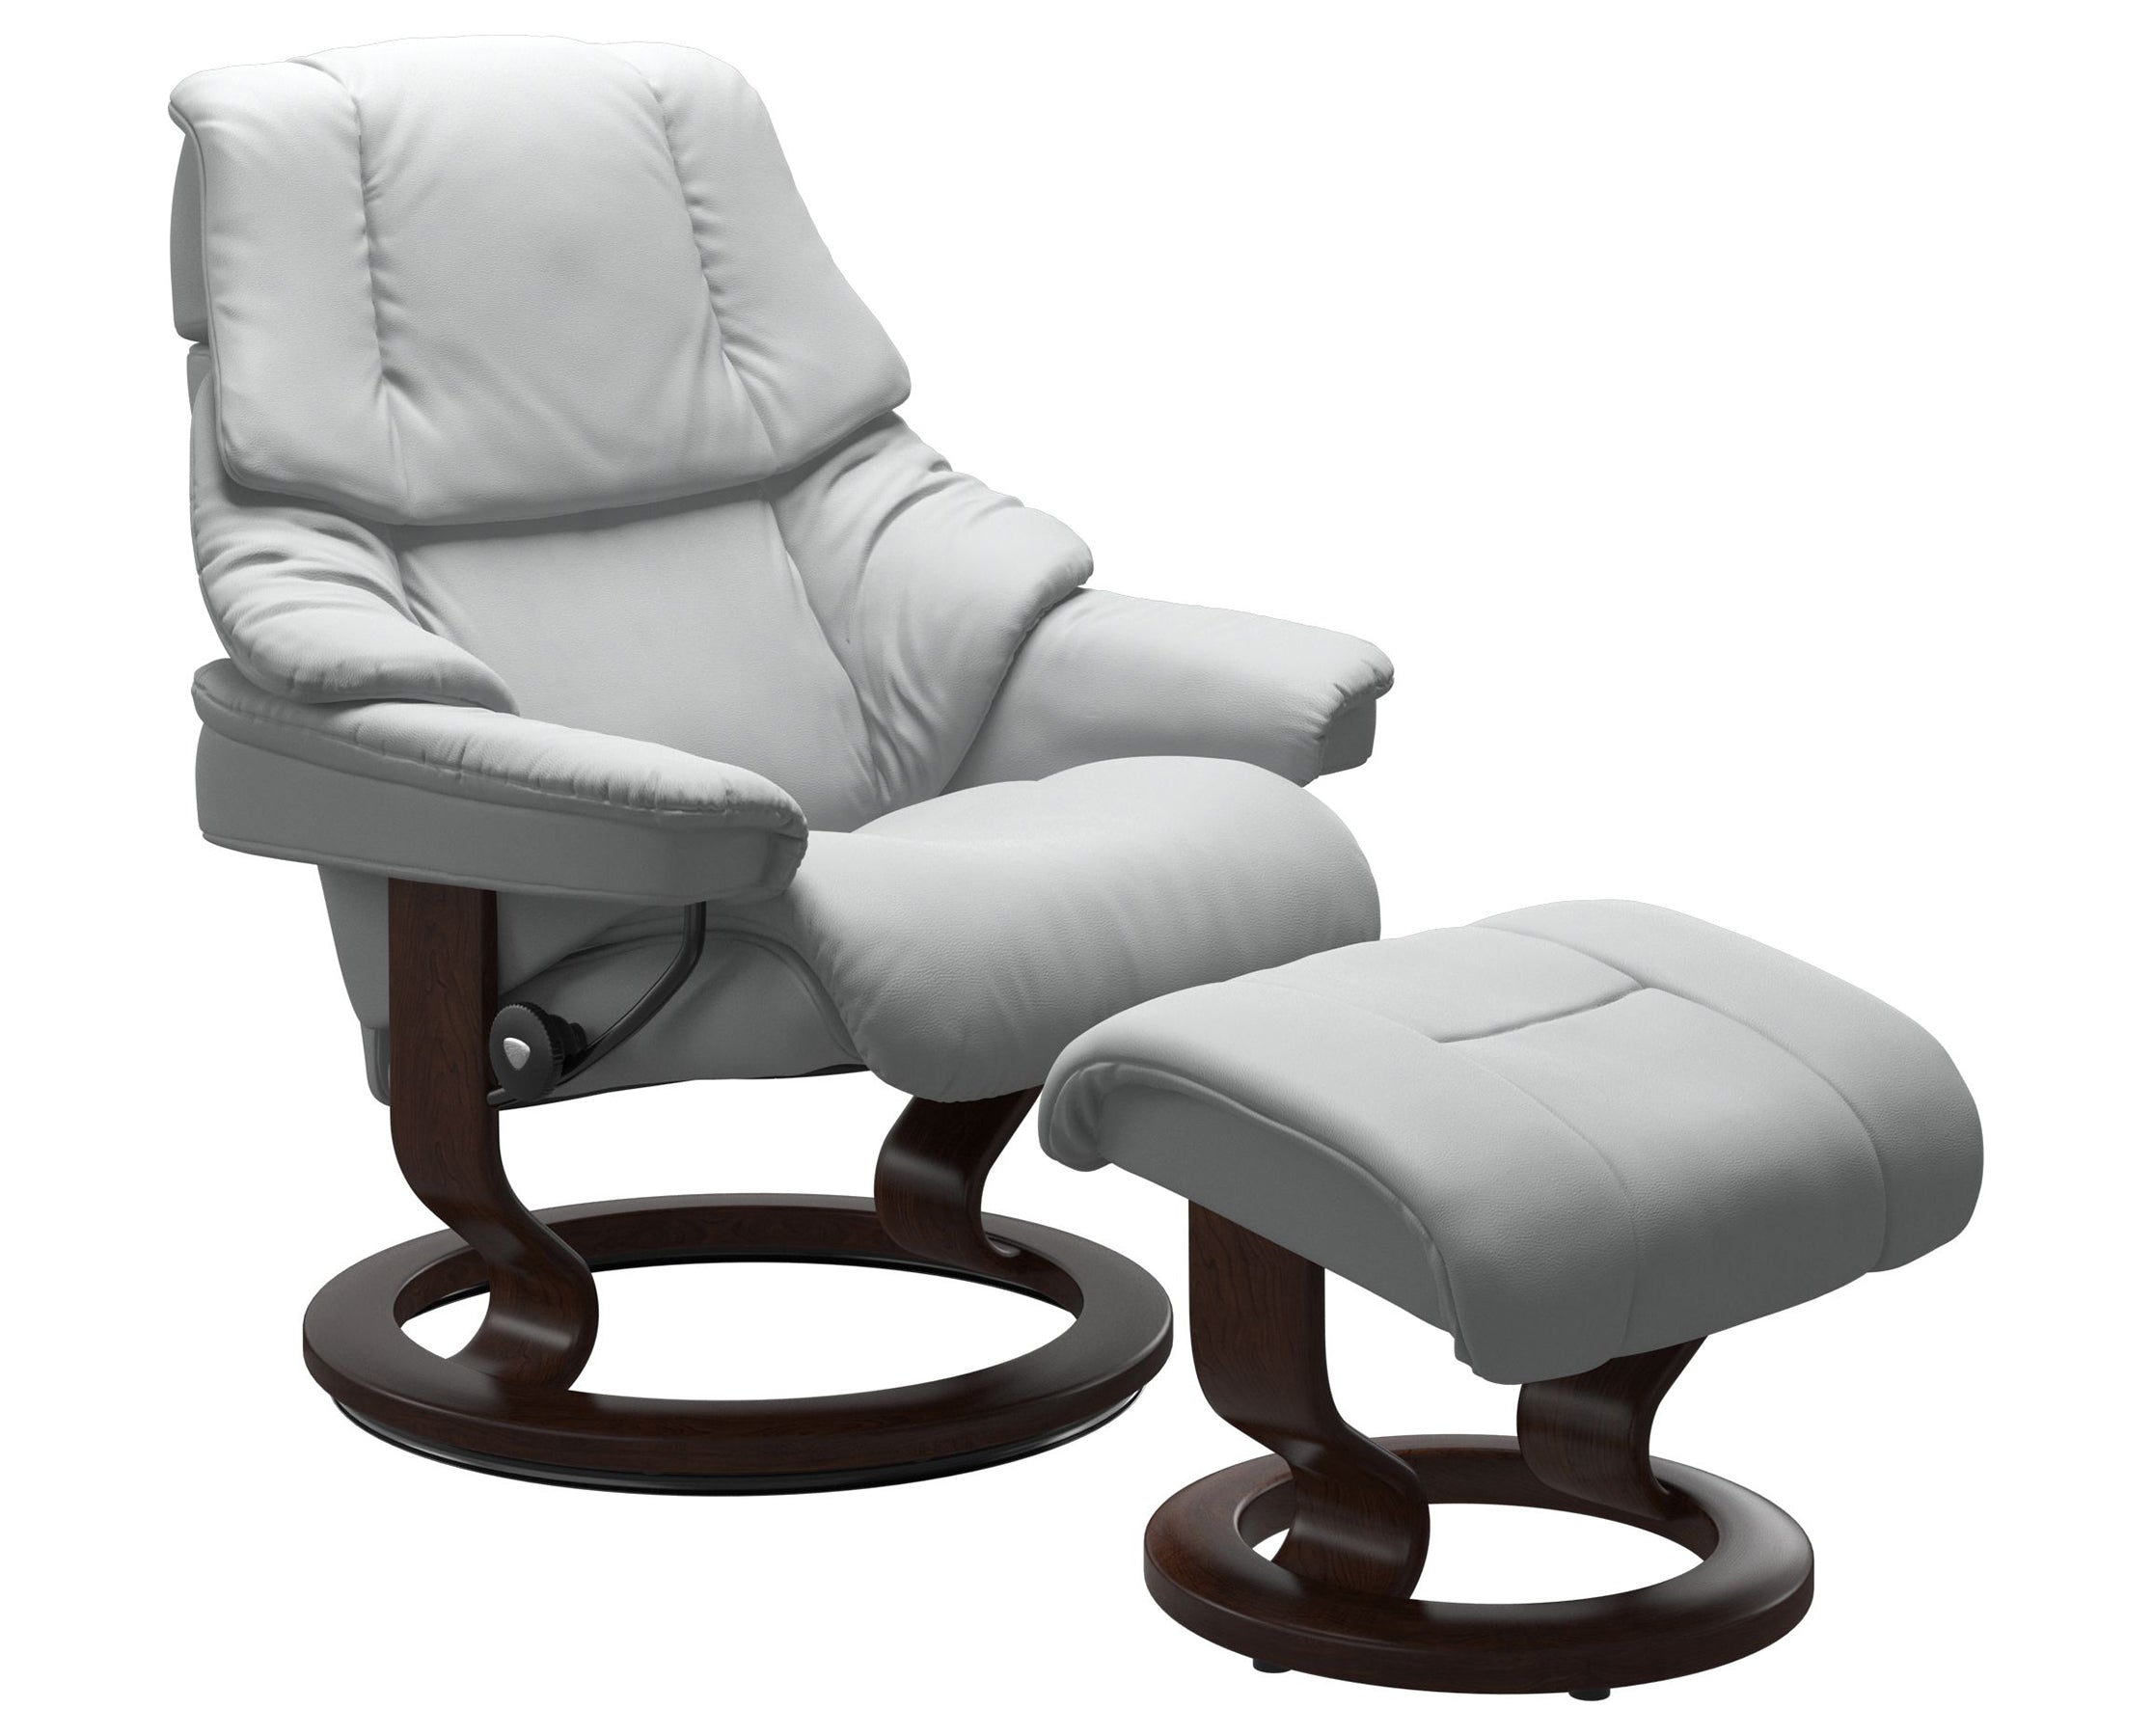 Paloma Leather Misty Grey S/M/L and Brown Base | Stressless Reno Classic Recliner | Valley Ridge Furniture